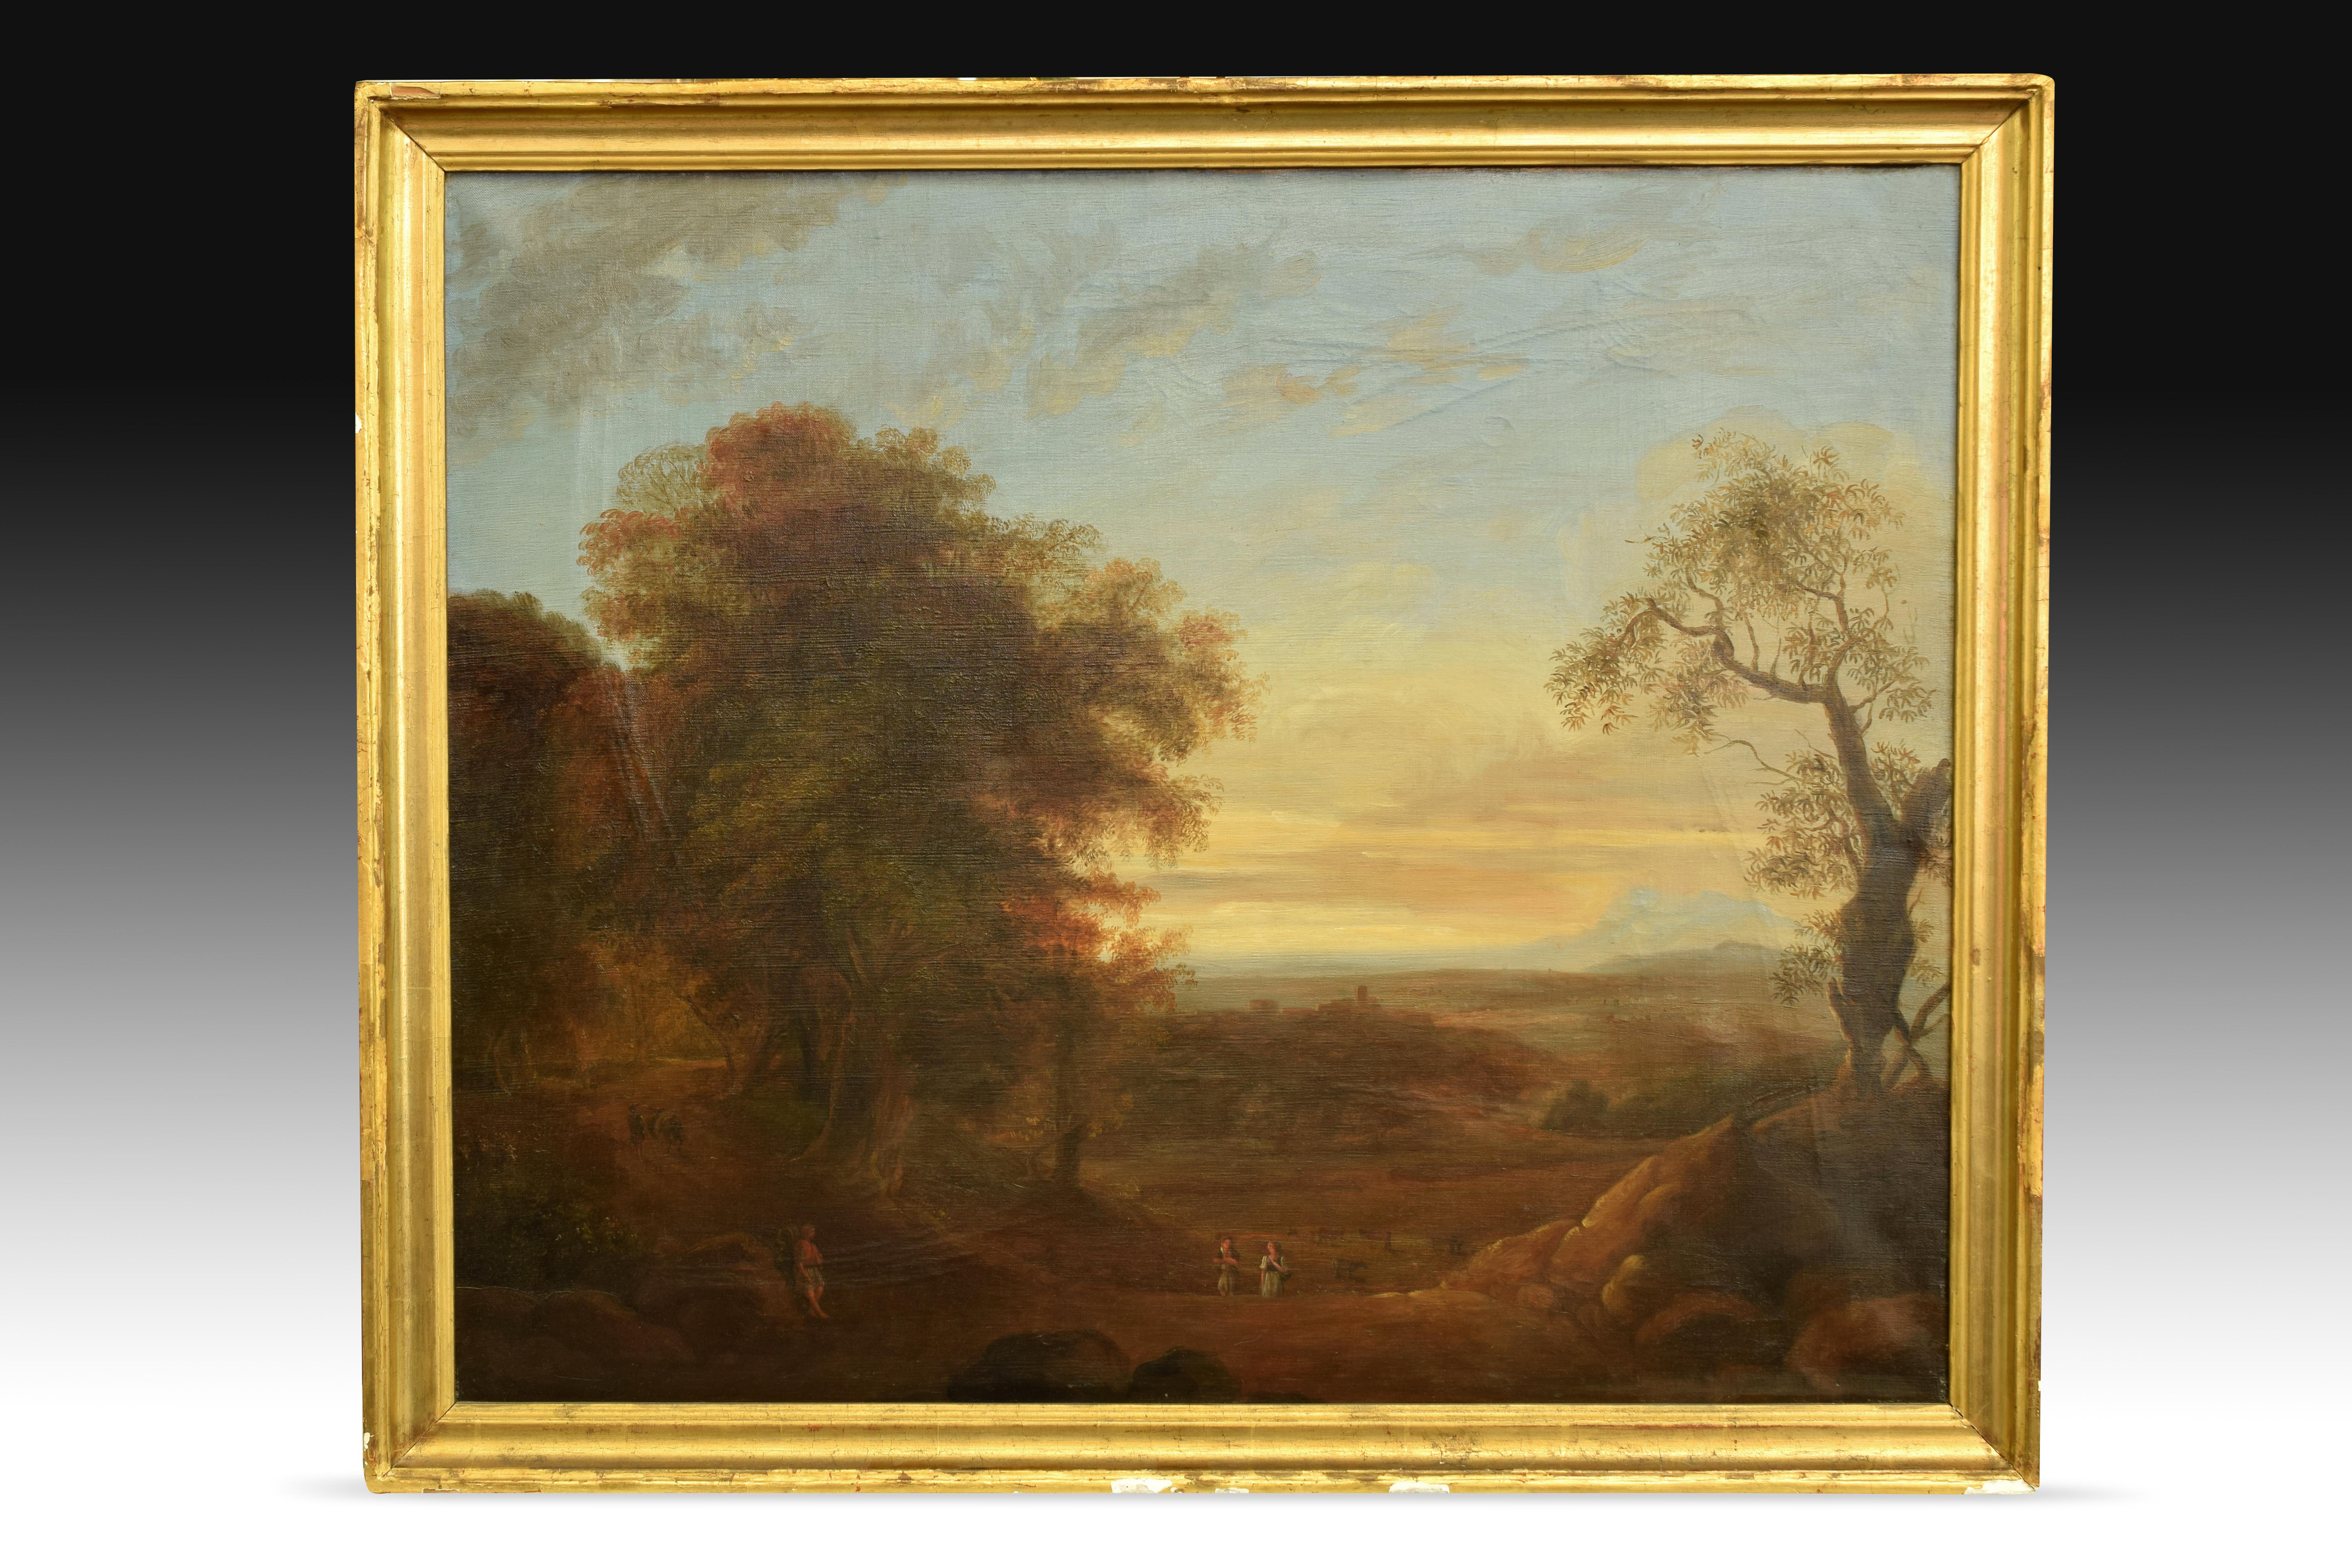 Landscapes, Xalapa, Mexico. Pair of oils on canvas. Spanish school, around 1840. 
Provenance: Conde de la Cortina collection, Jalapa, Mexico. 
Couple of landscapes framed within the Spanish school of the first half of the 19th century, with a